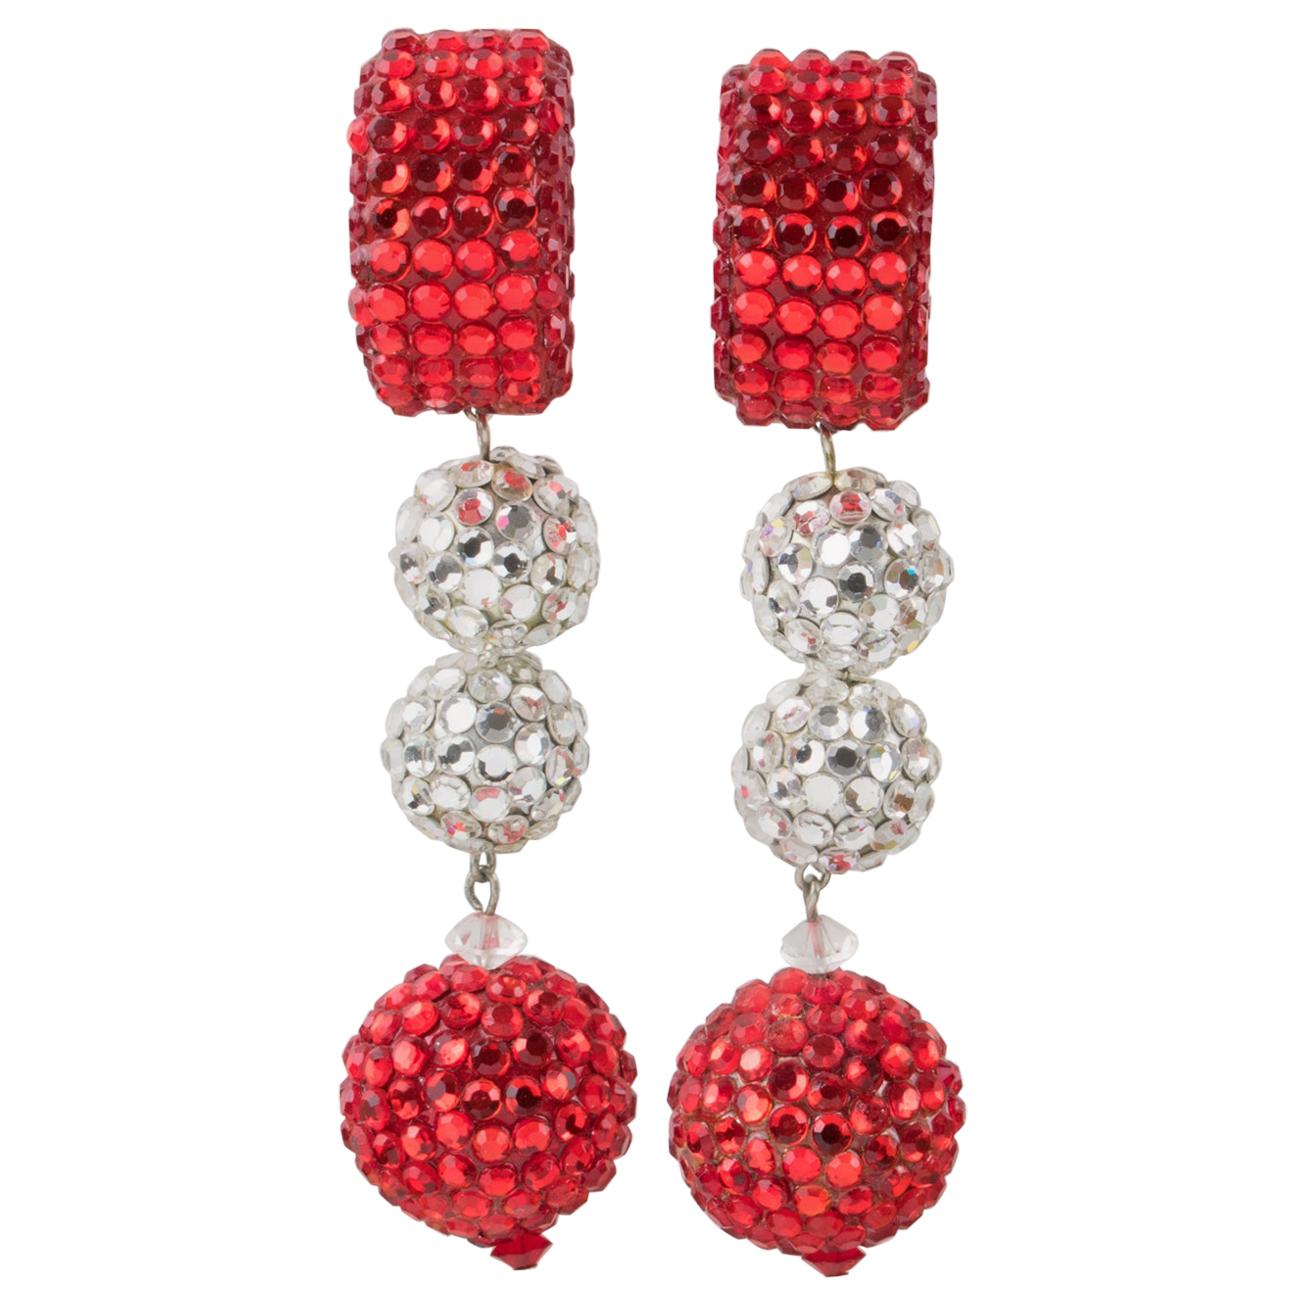 Richard Kerr Oversized Red and White Jeweled Clip Earrings For Sale